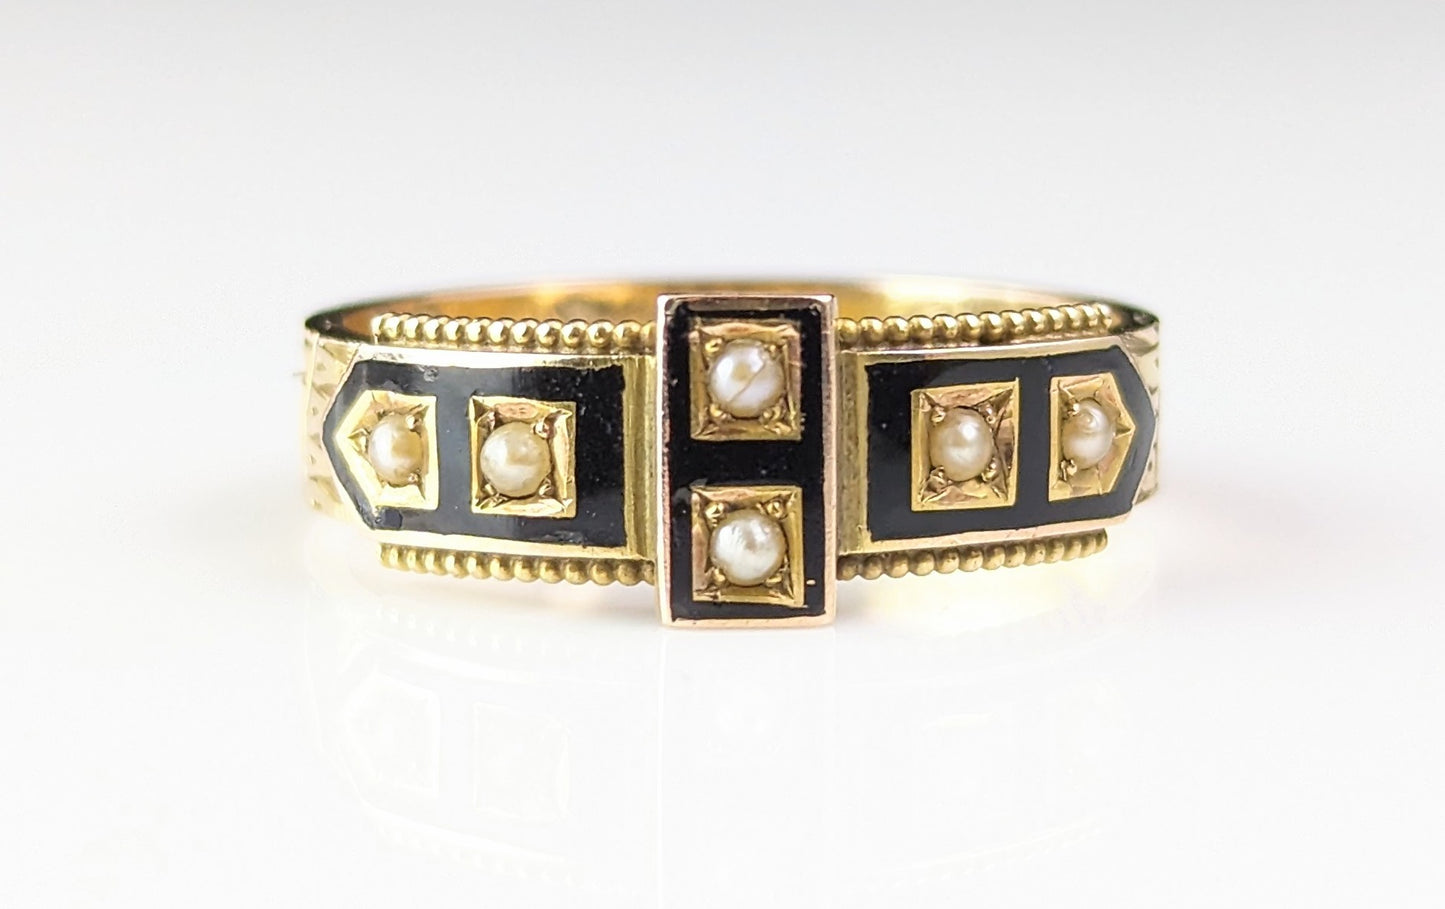 Antique Victorian mourning ring, Black enamel, Pearl, 9ct gold and hairwork